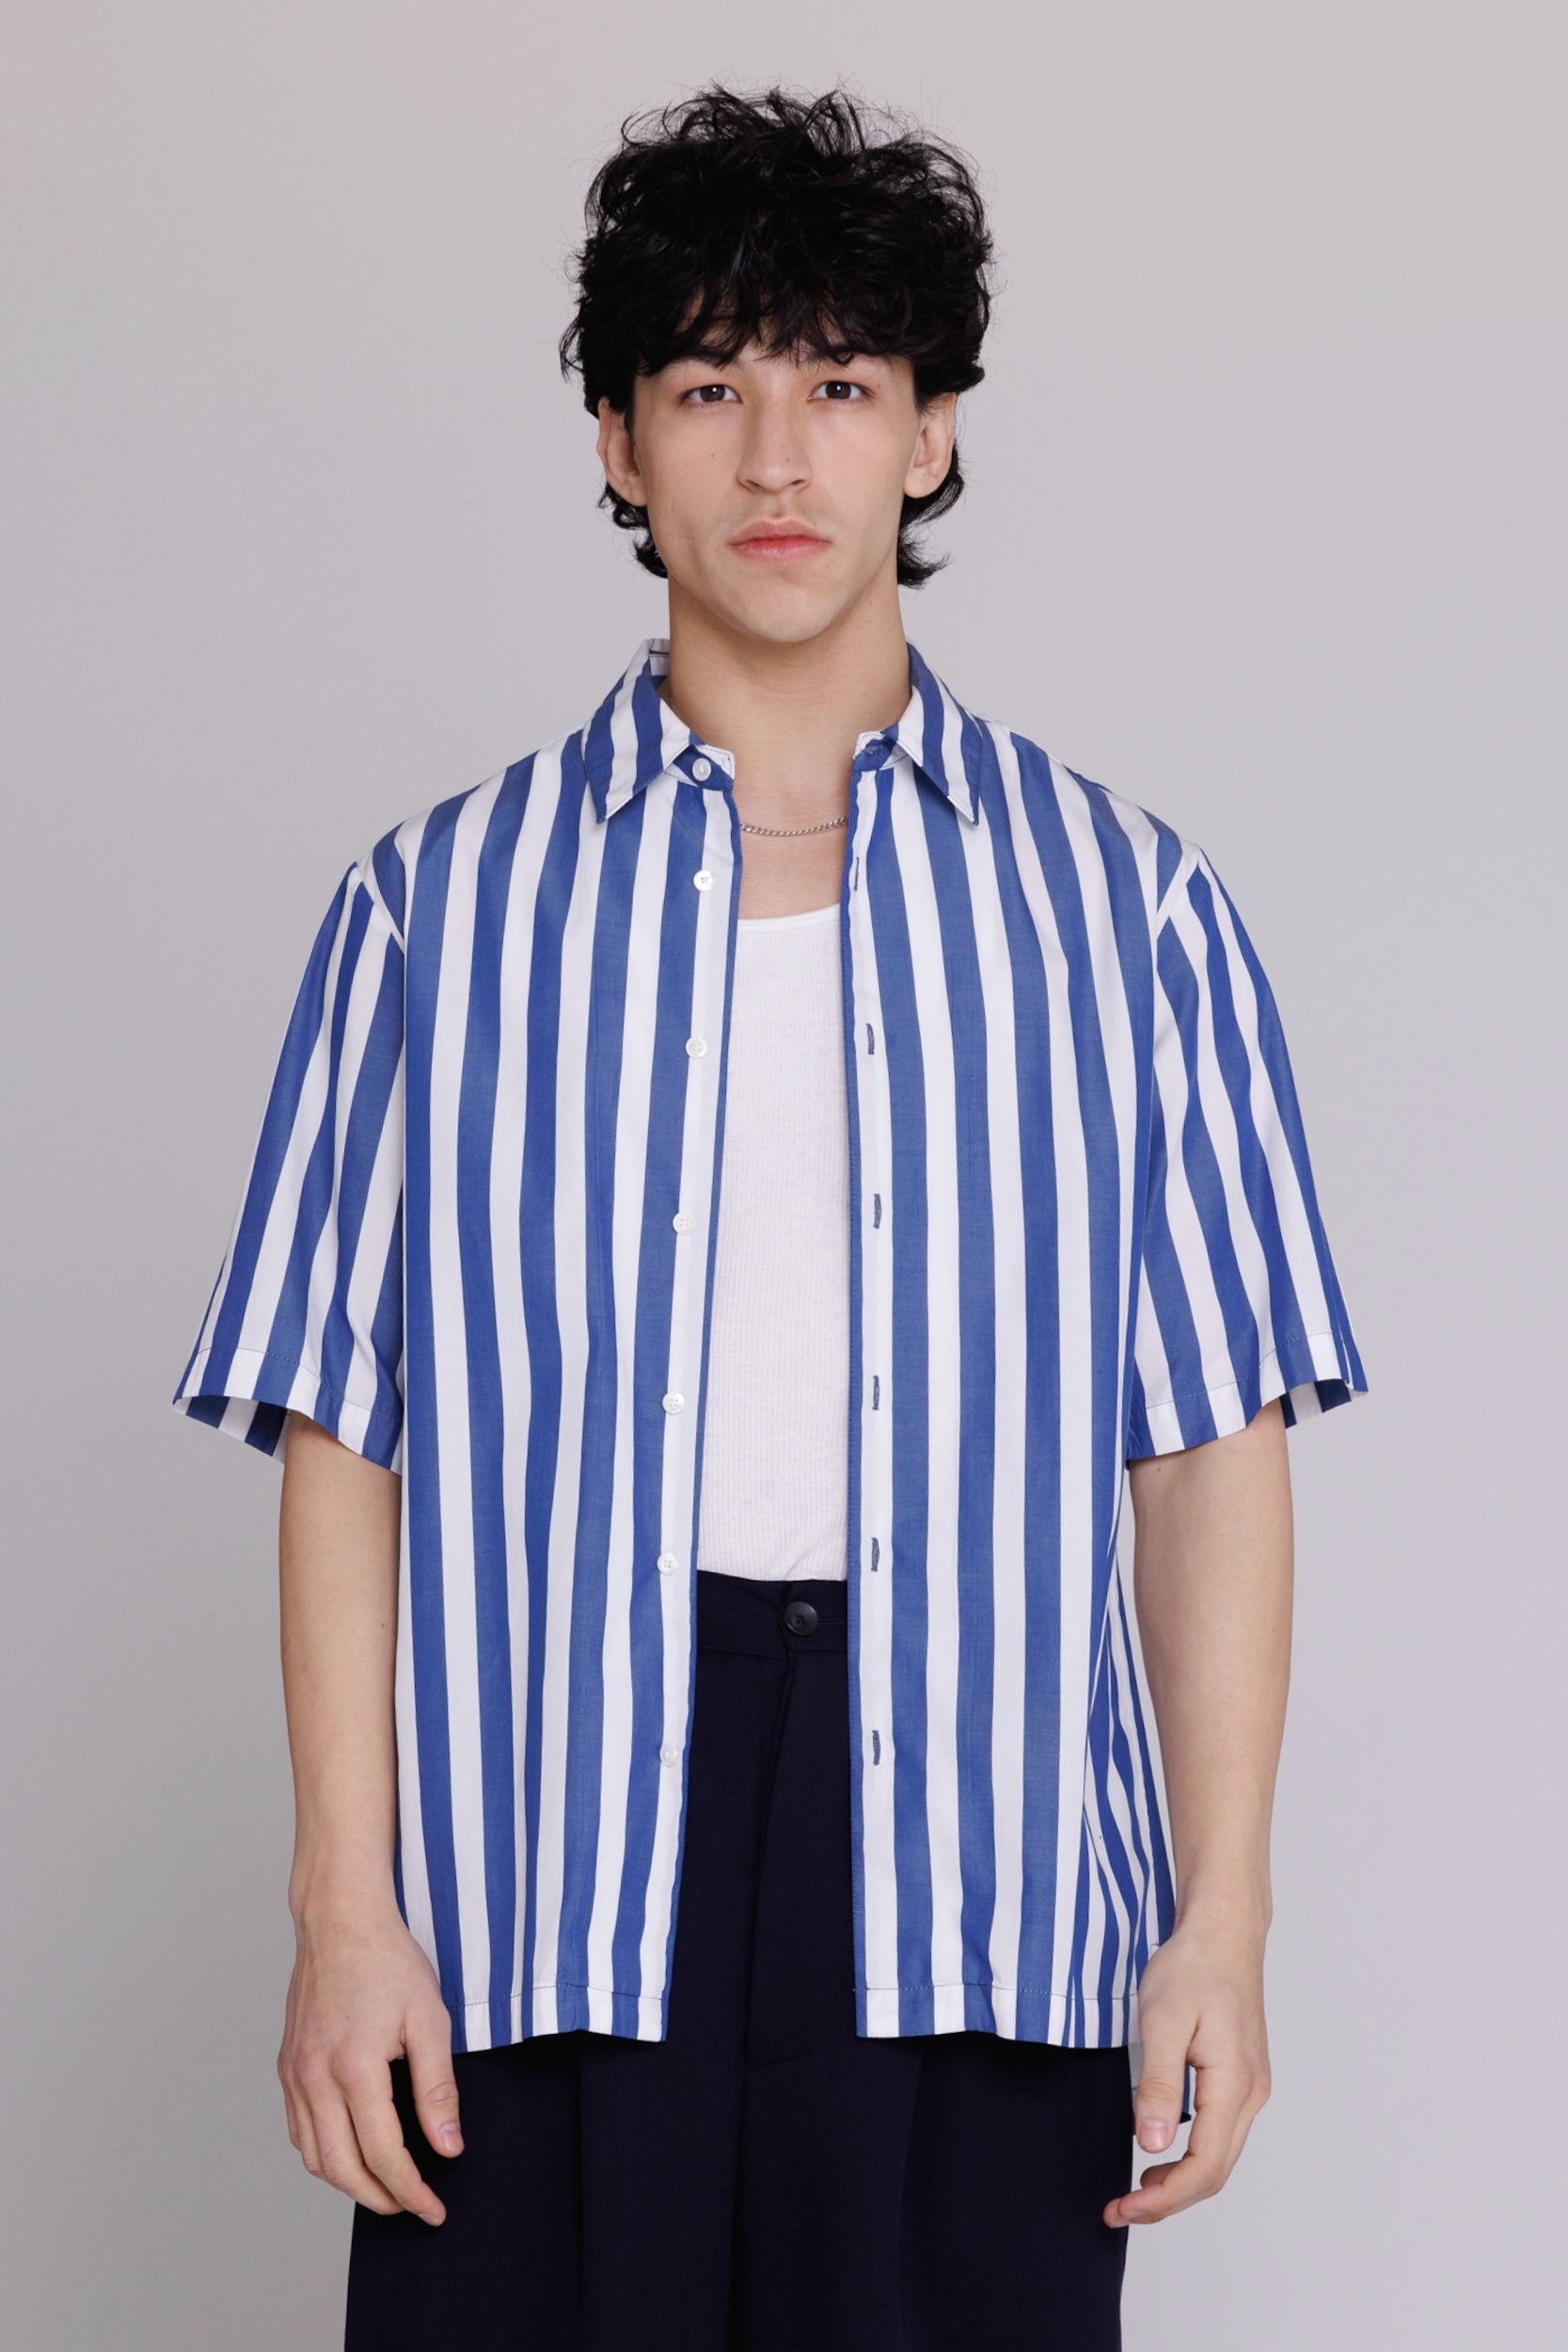 "Flowers" Button Up Shirt in Blue & White Bar Stripes